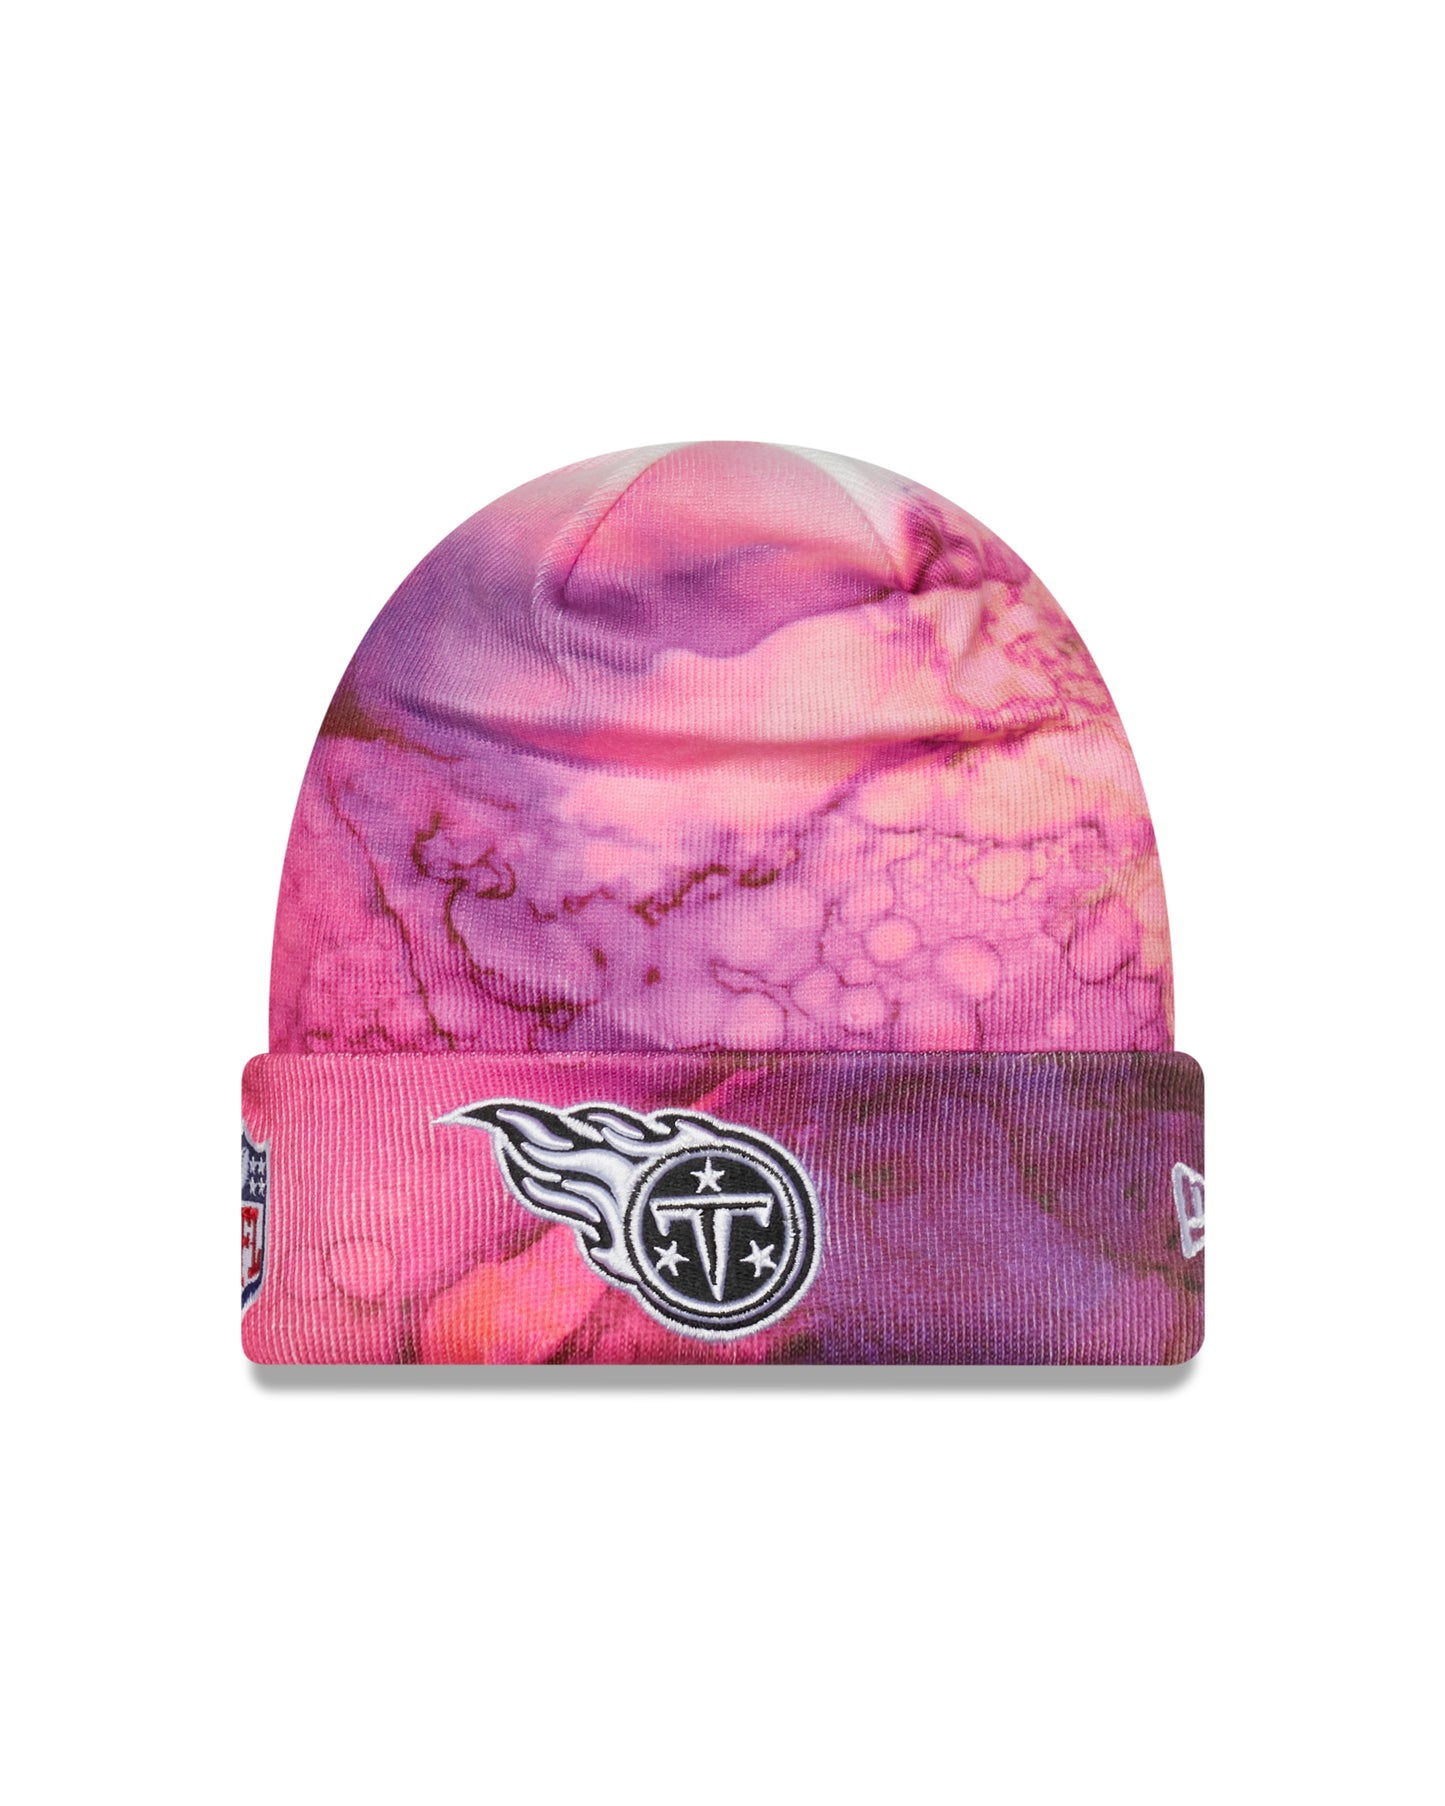 NFL Tennessee Titans New Era Crucial Catch Knit Hat- Pink Ink